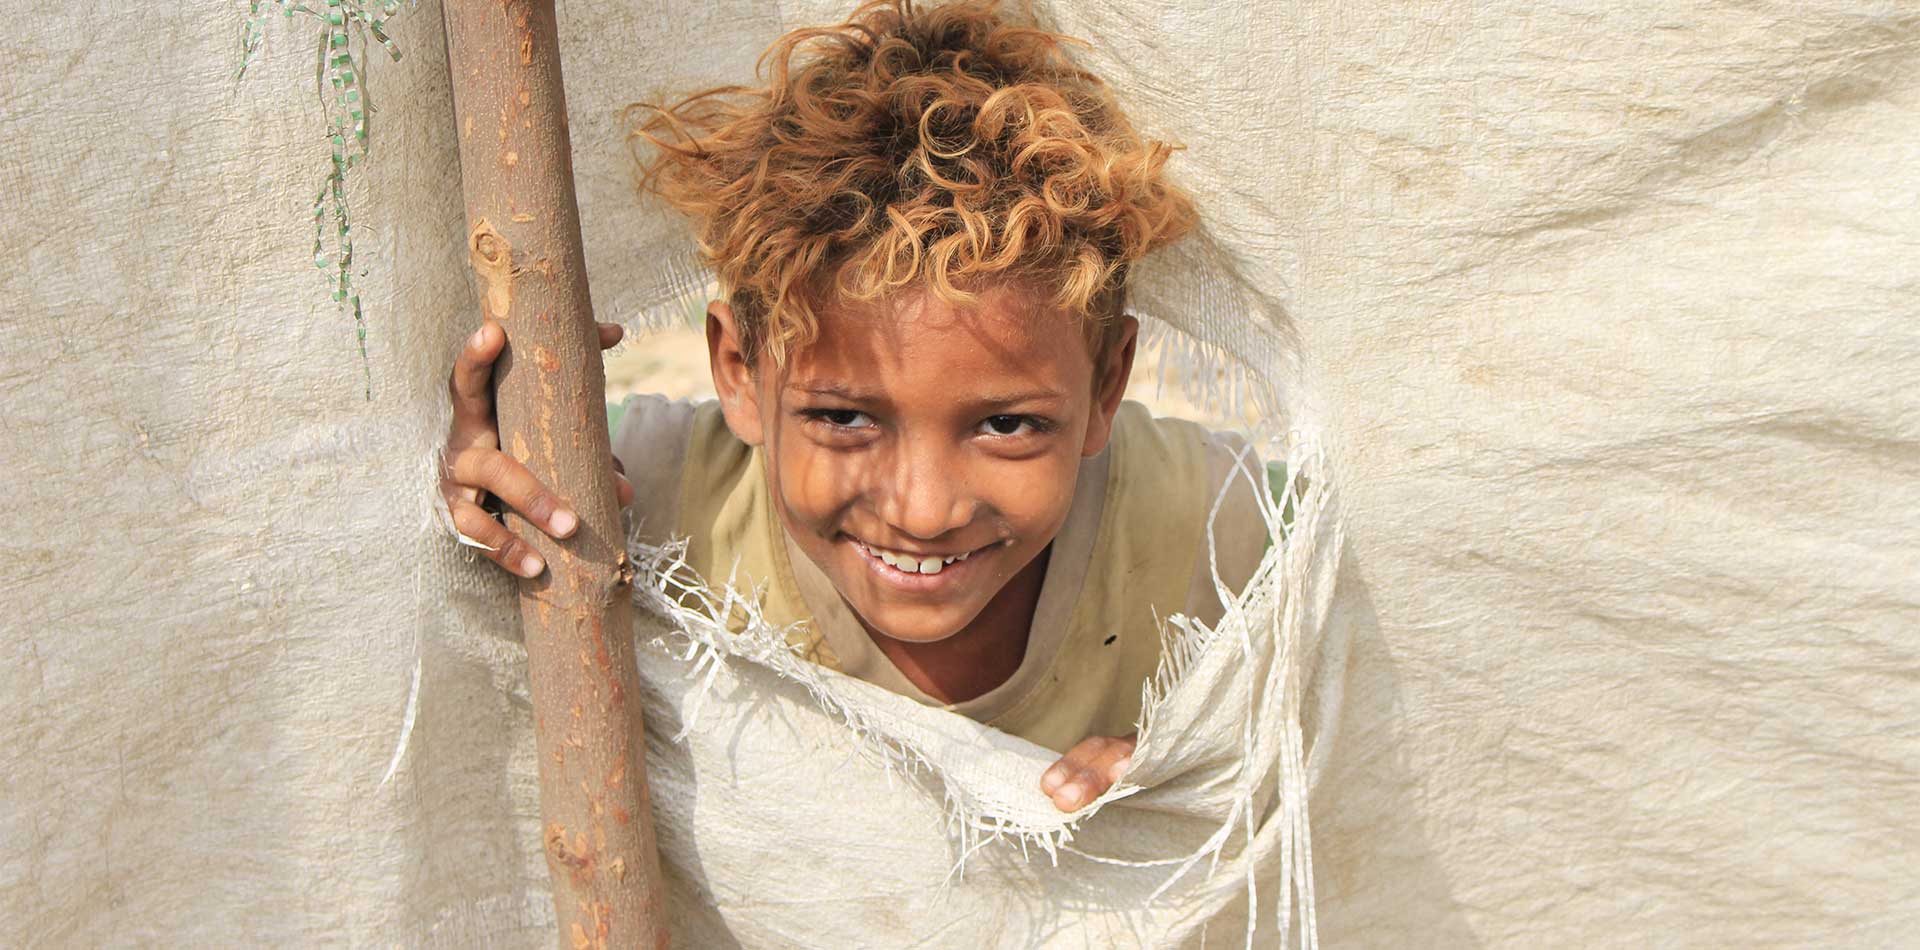 A displaced Yemeni child smiles from a torn tent